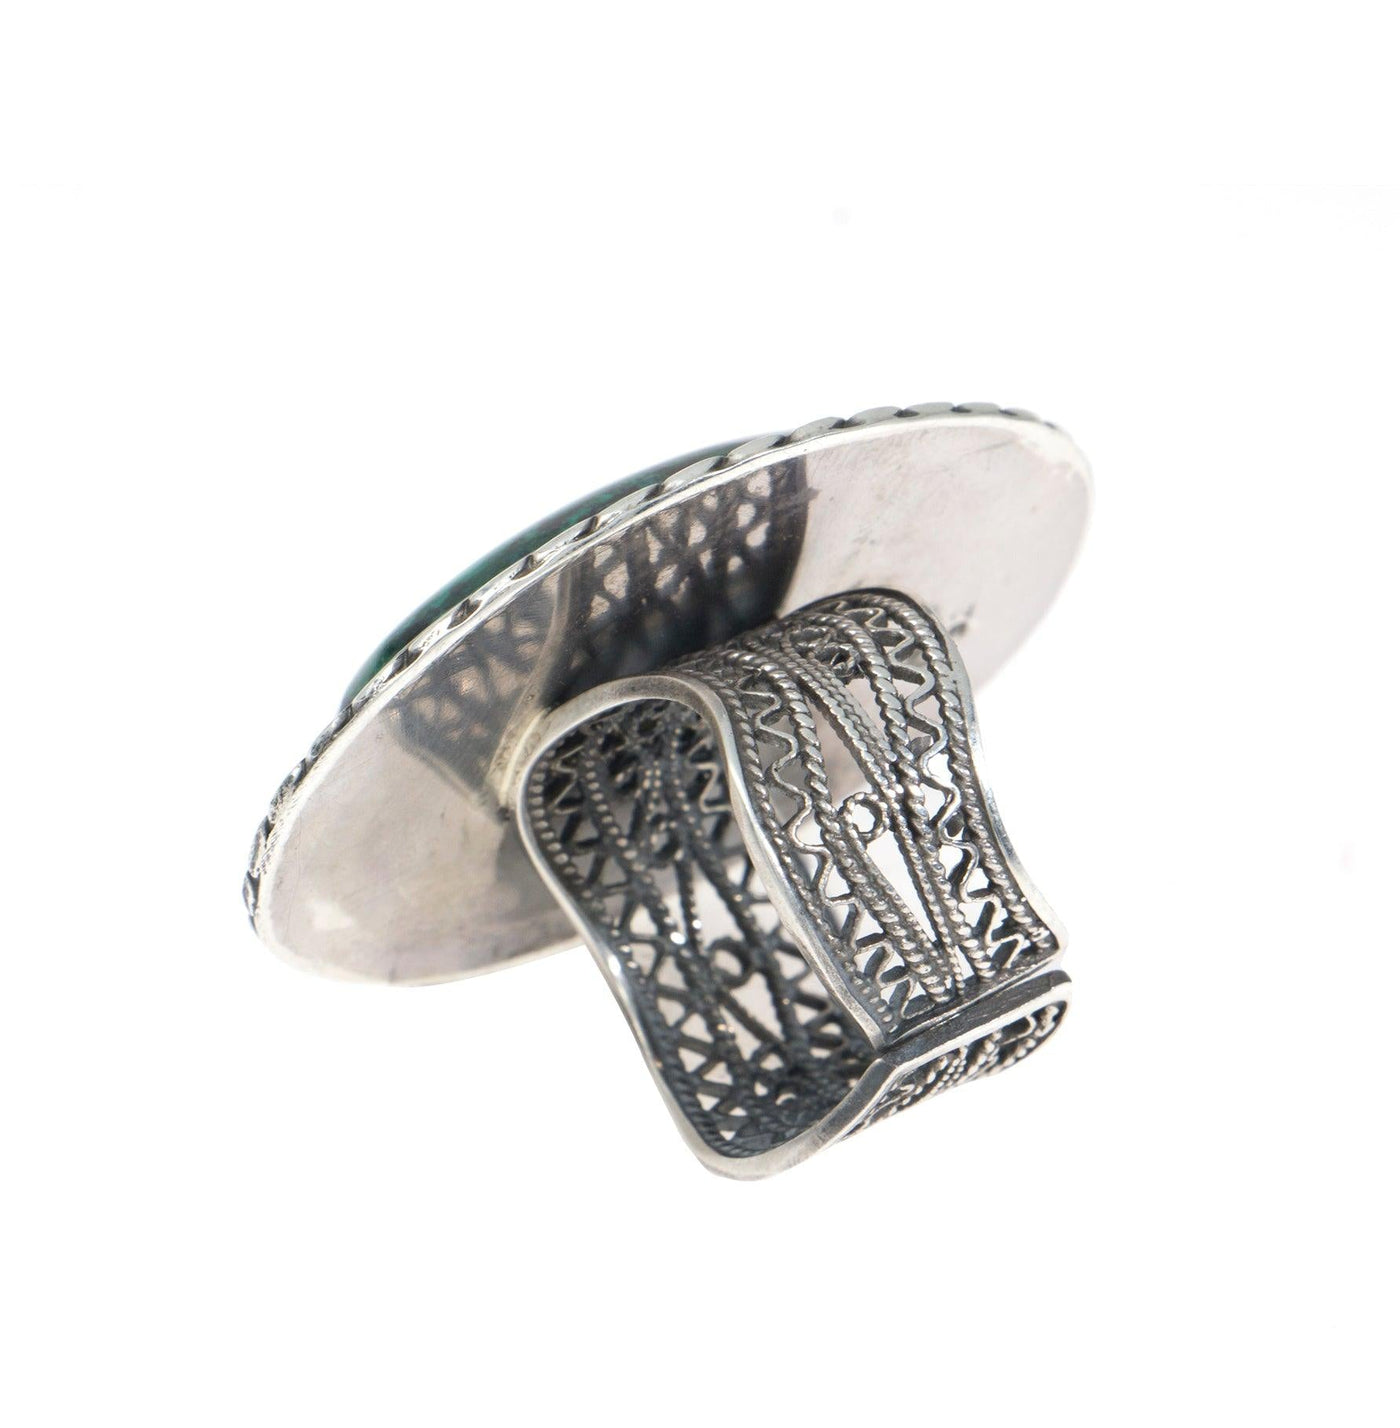 Eilat Stone Ring in 925 Sterling Silver #2 - Spring Nahal